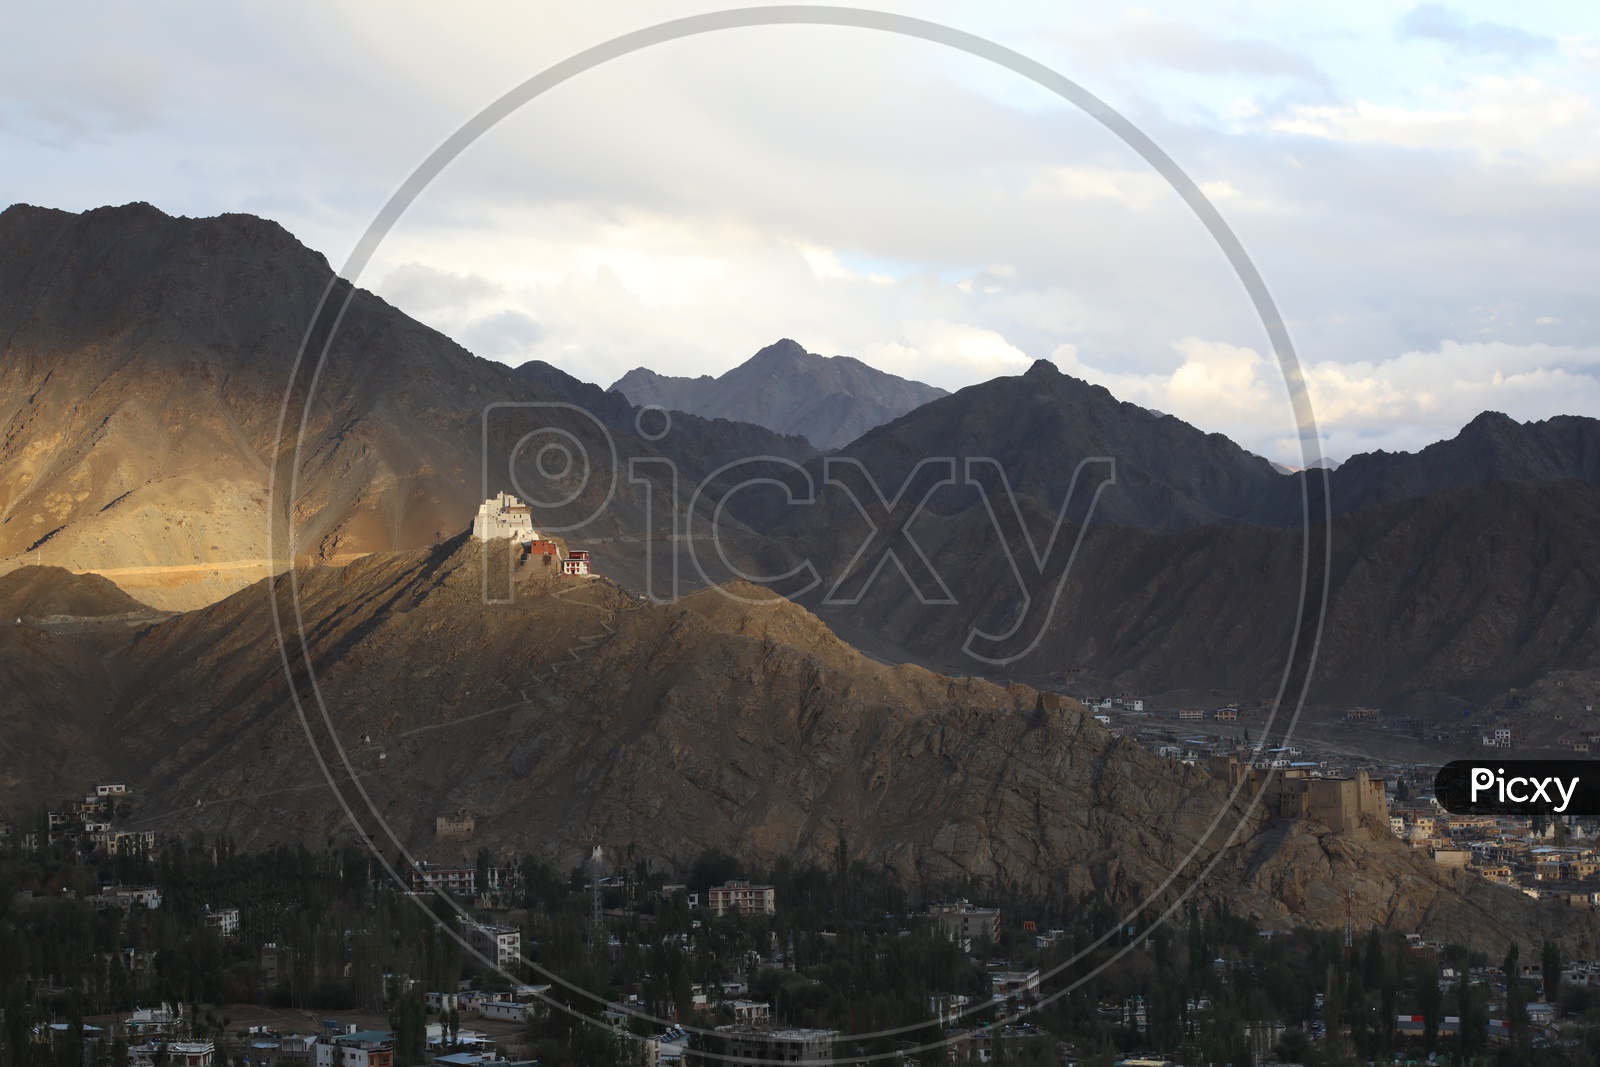 Landscapes of Leh - Mountains/Clouds/Houses/Snow